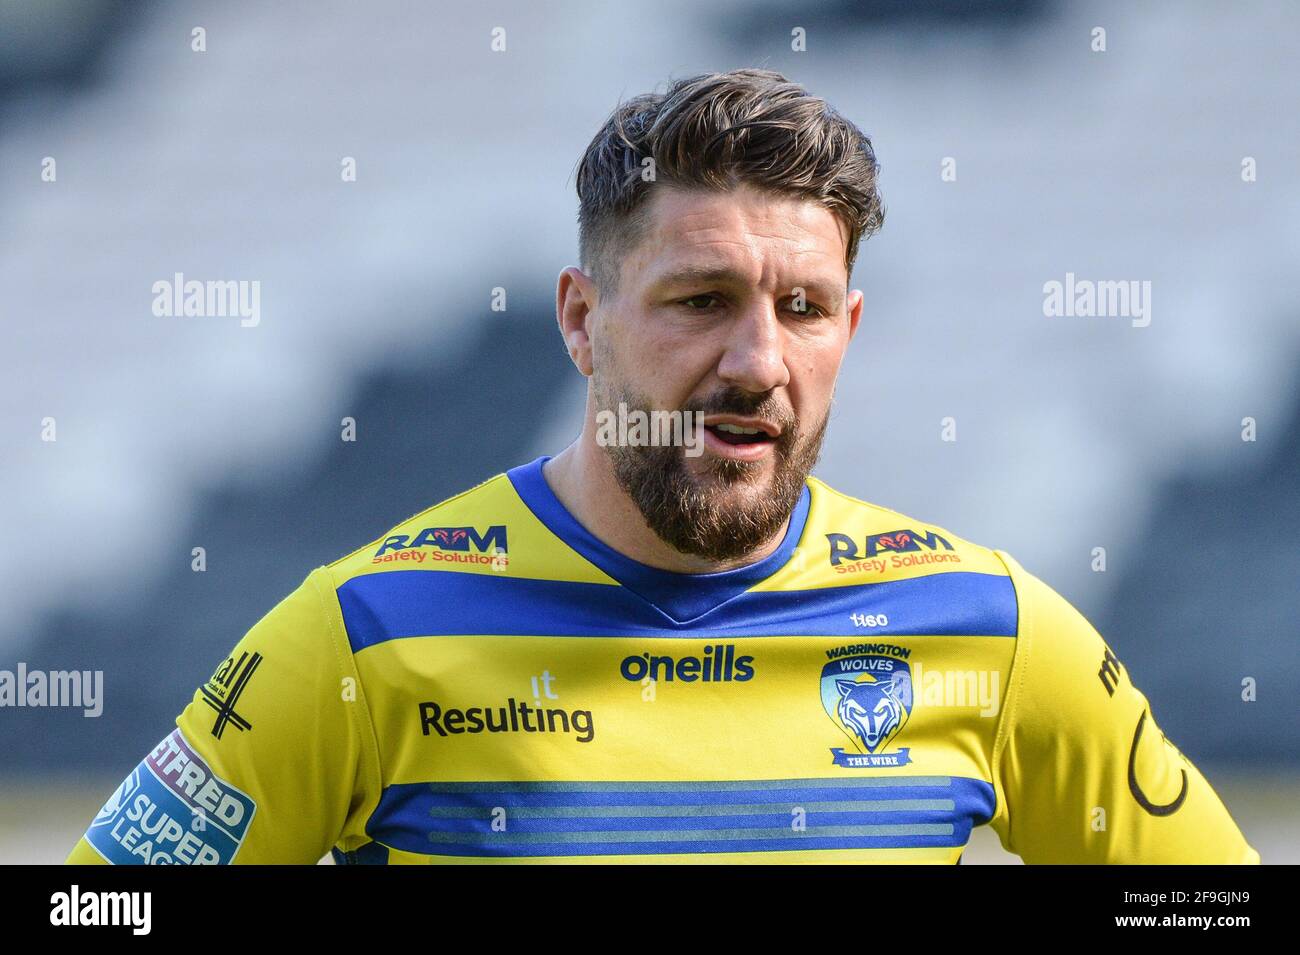 Kingston Upon Hull, England - 18th April 2021 - Gareth Widdop (7) of Warrington Wolves during the Rugby League Betfred Super League Round 3 Hull FC vs Warrington Wolves at KCOM Stadium, Kingston Upon Hull, UK  Dean Williams/Alamy Live News Stock Photo